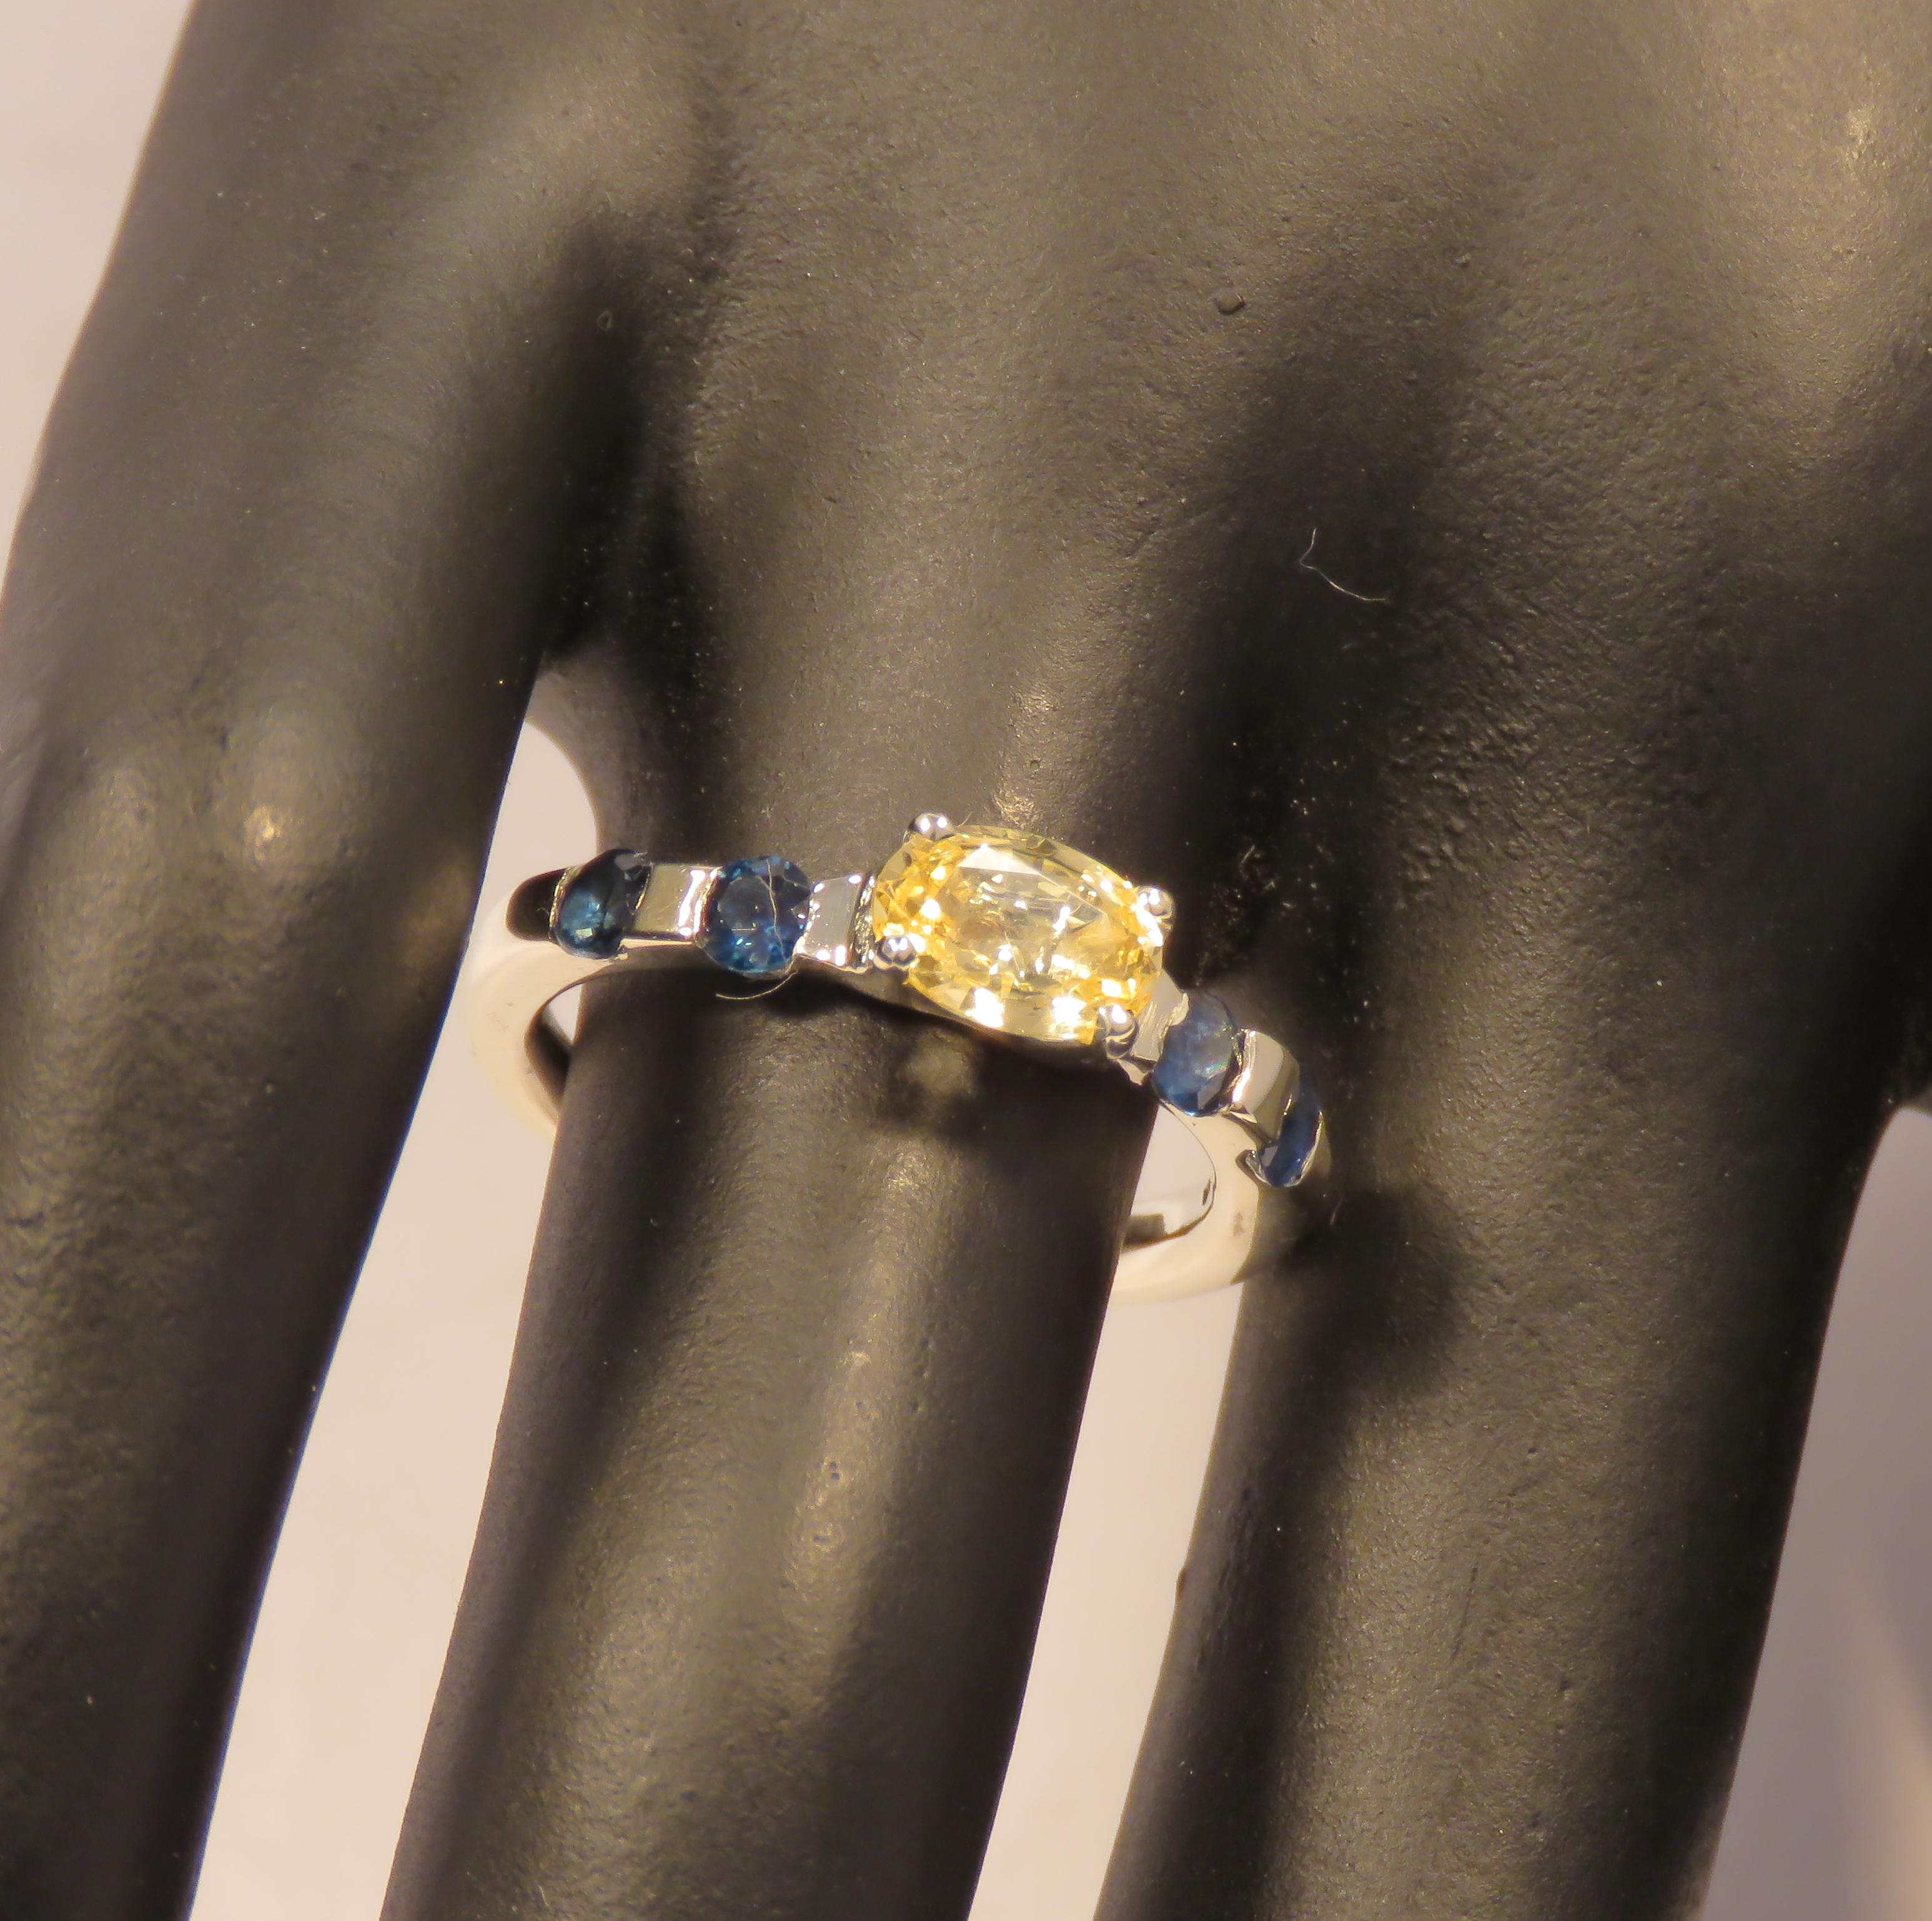 Modern gracious ring with a centre oval yellow sapphire weighing 1.00 ctw, and two natural brilliant cut blue sapphires weighing 0.30 ctw either side of the setting. The ring is completely handcrafted in 9 karat white gold. The dimension of the